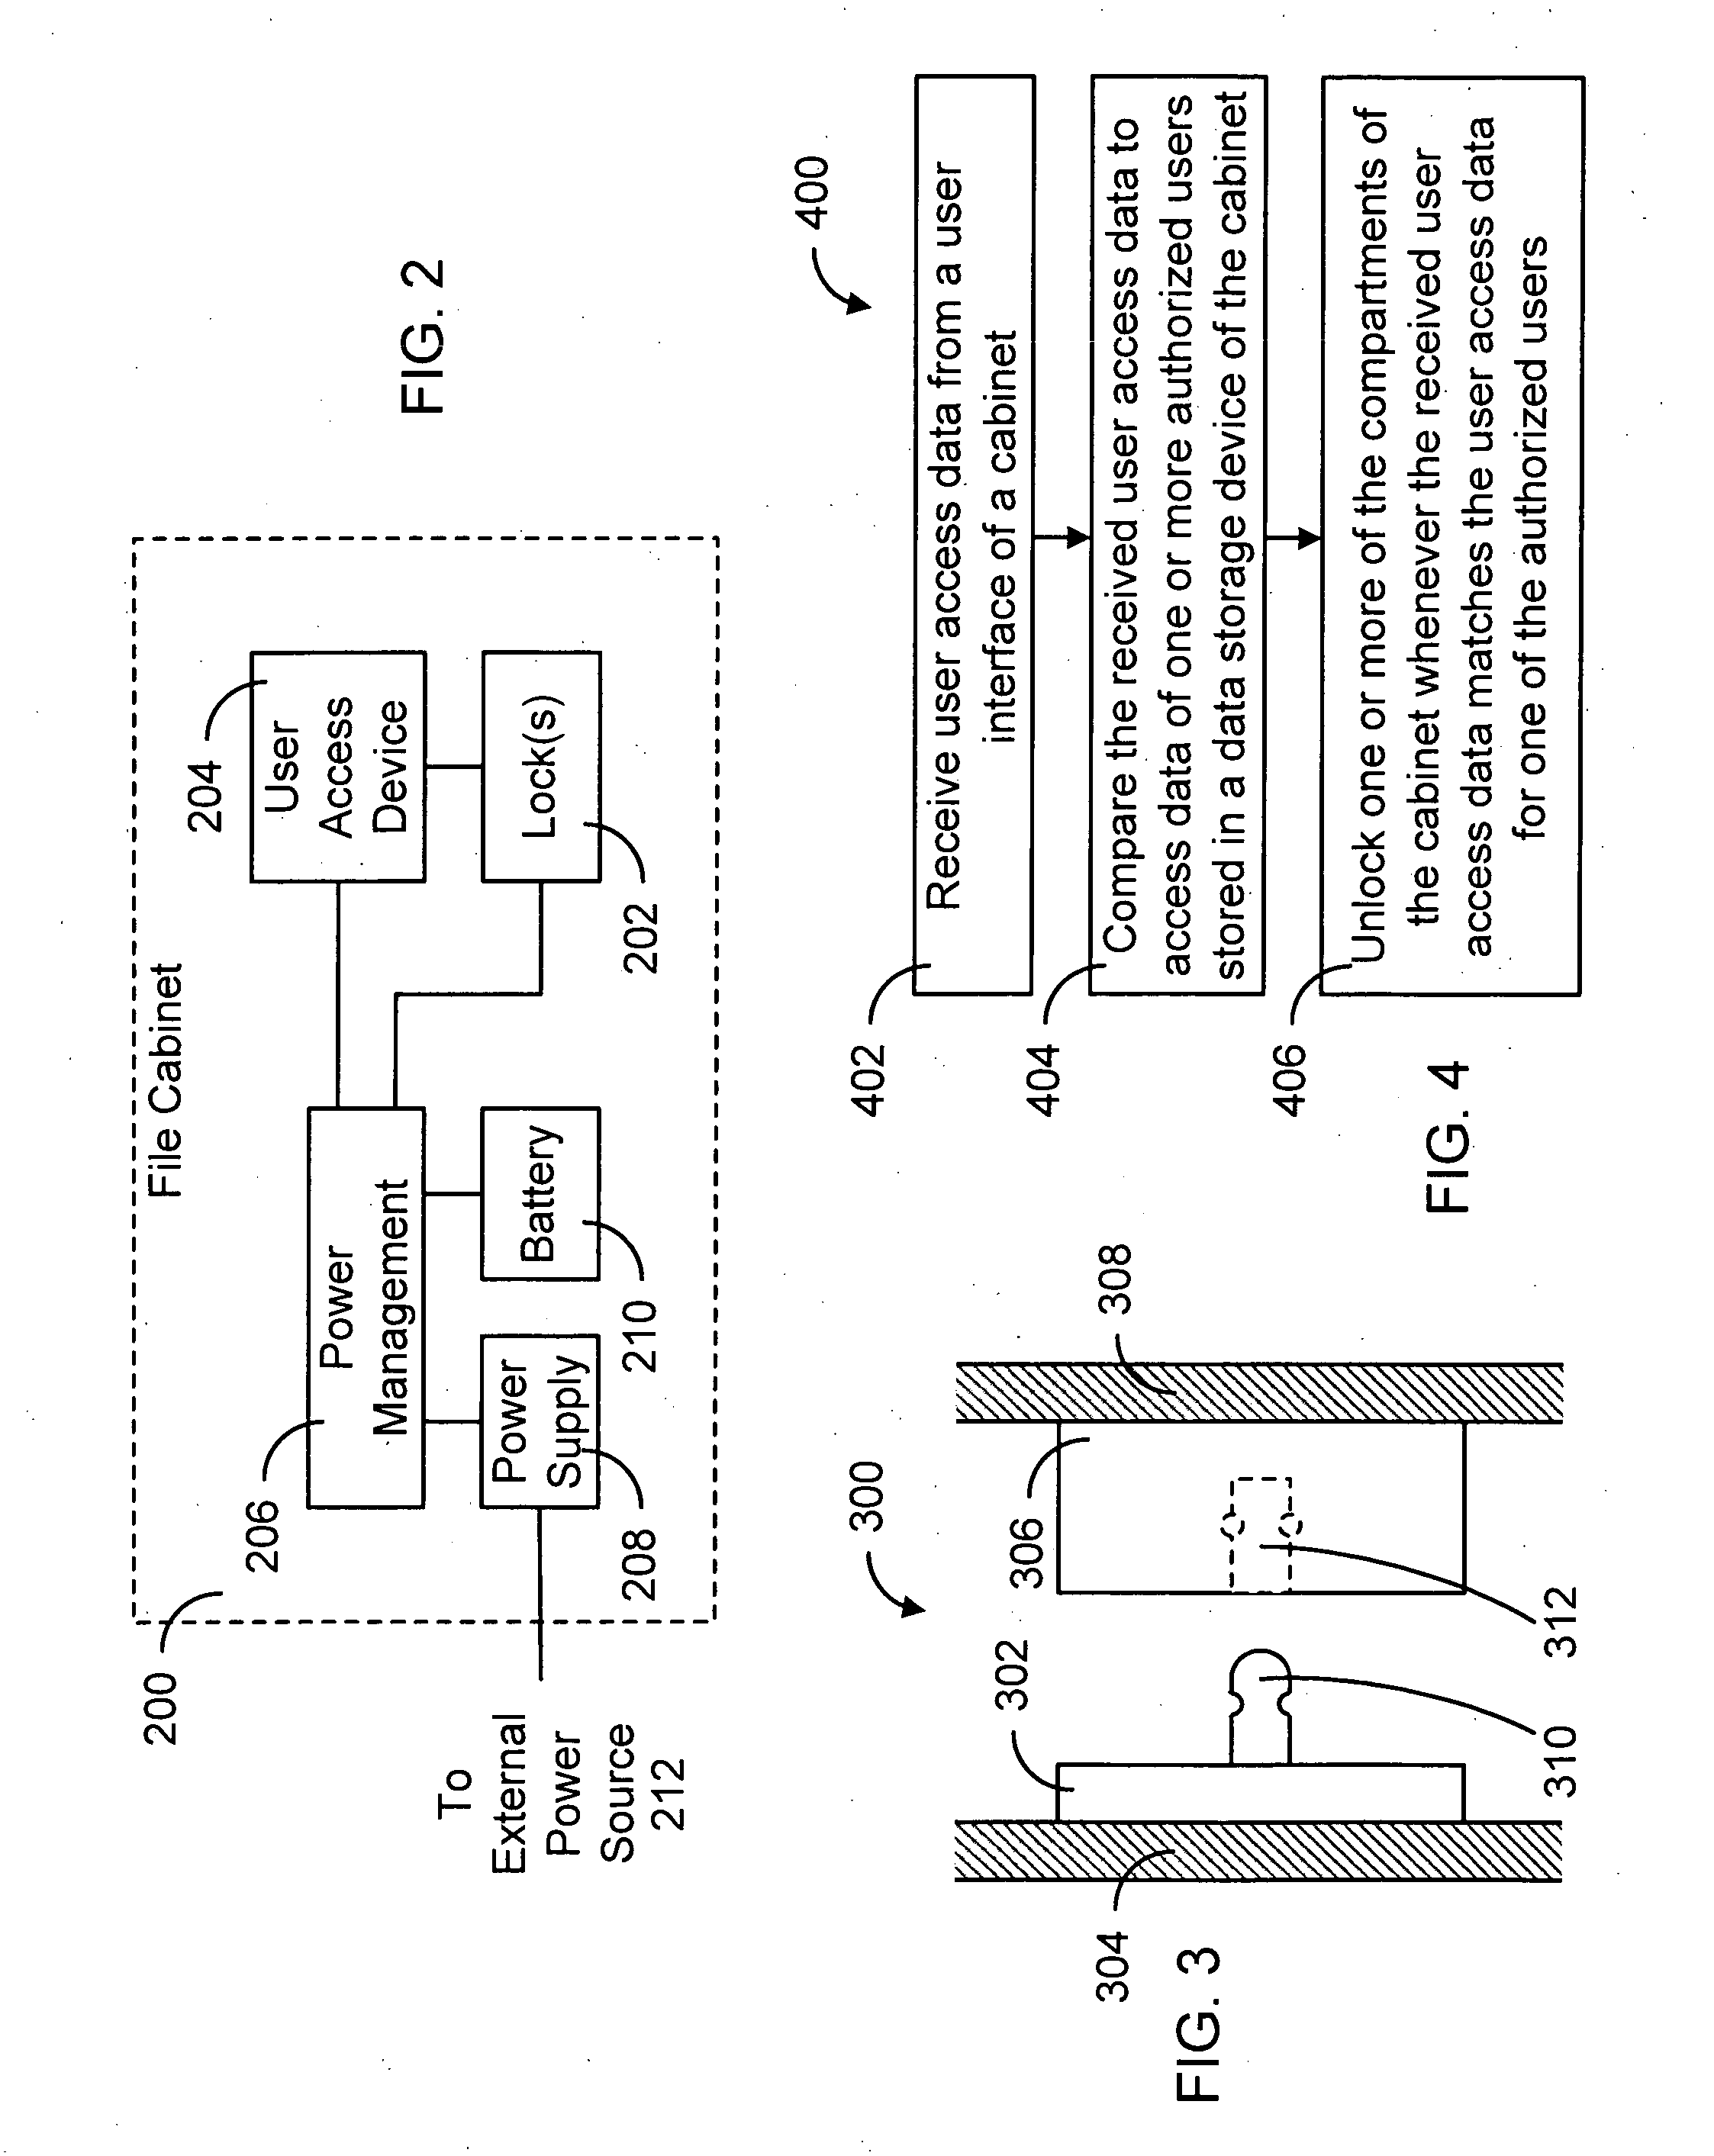 Method, apparatus and system for controlling access to a storage unit